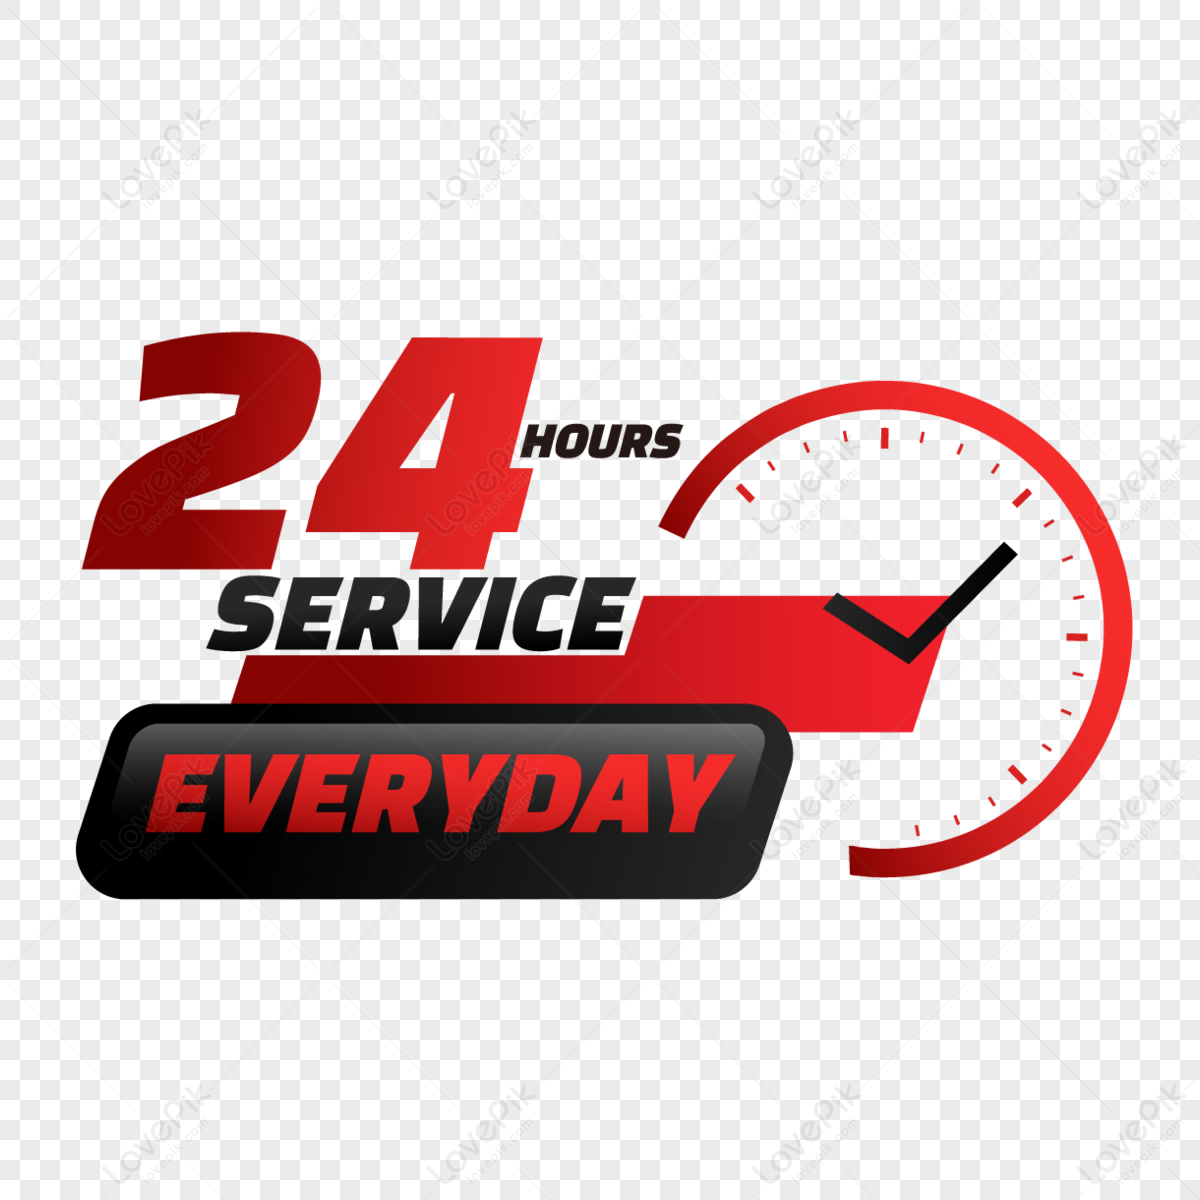 Free: 24 hour service design with clock - nohat.cc